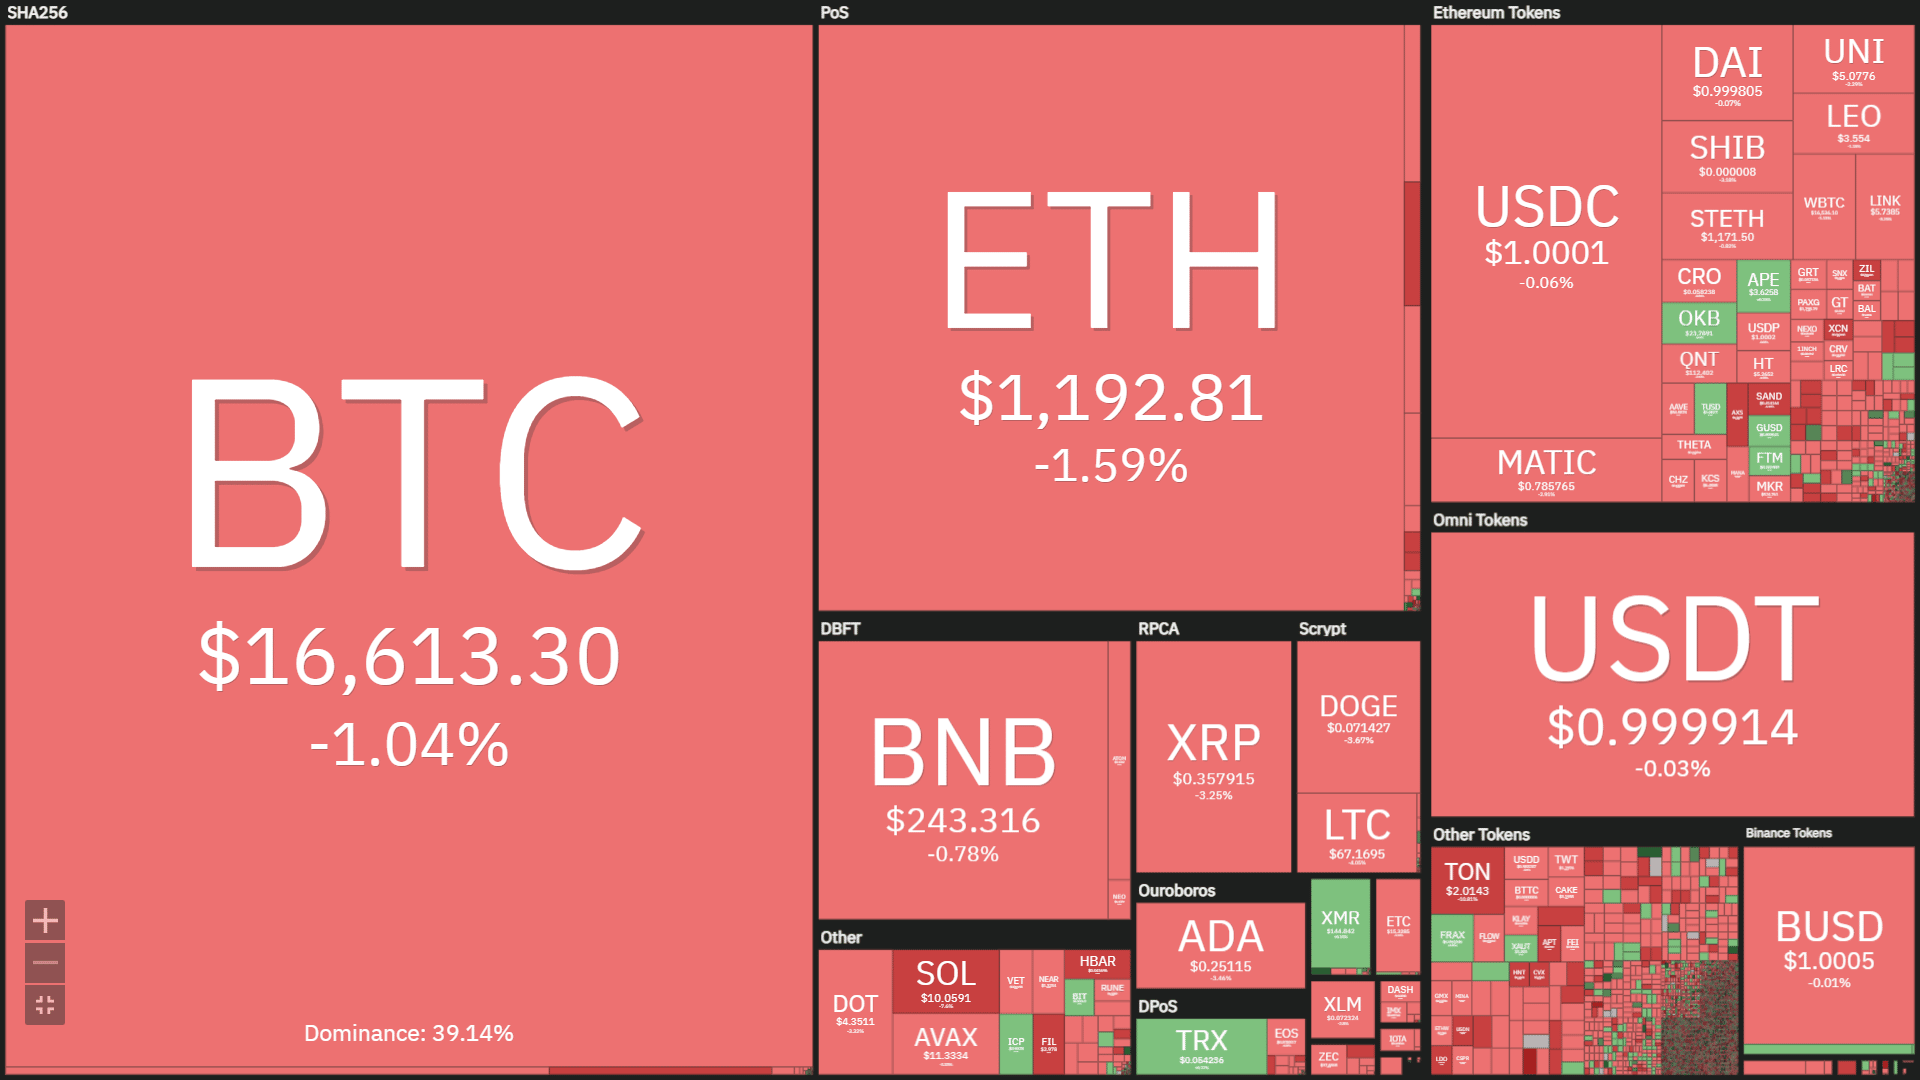  heatmap of cryptocurrency prices